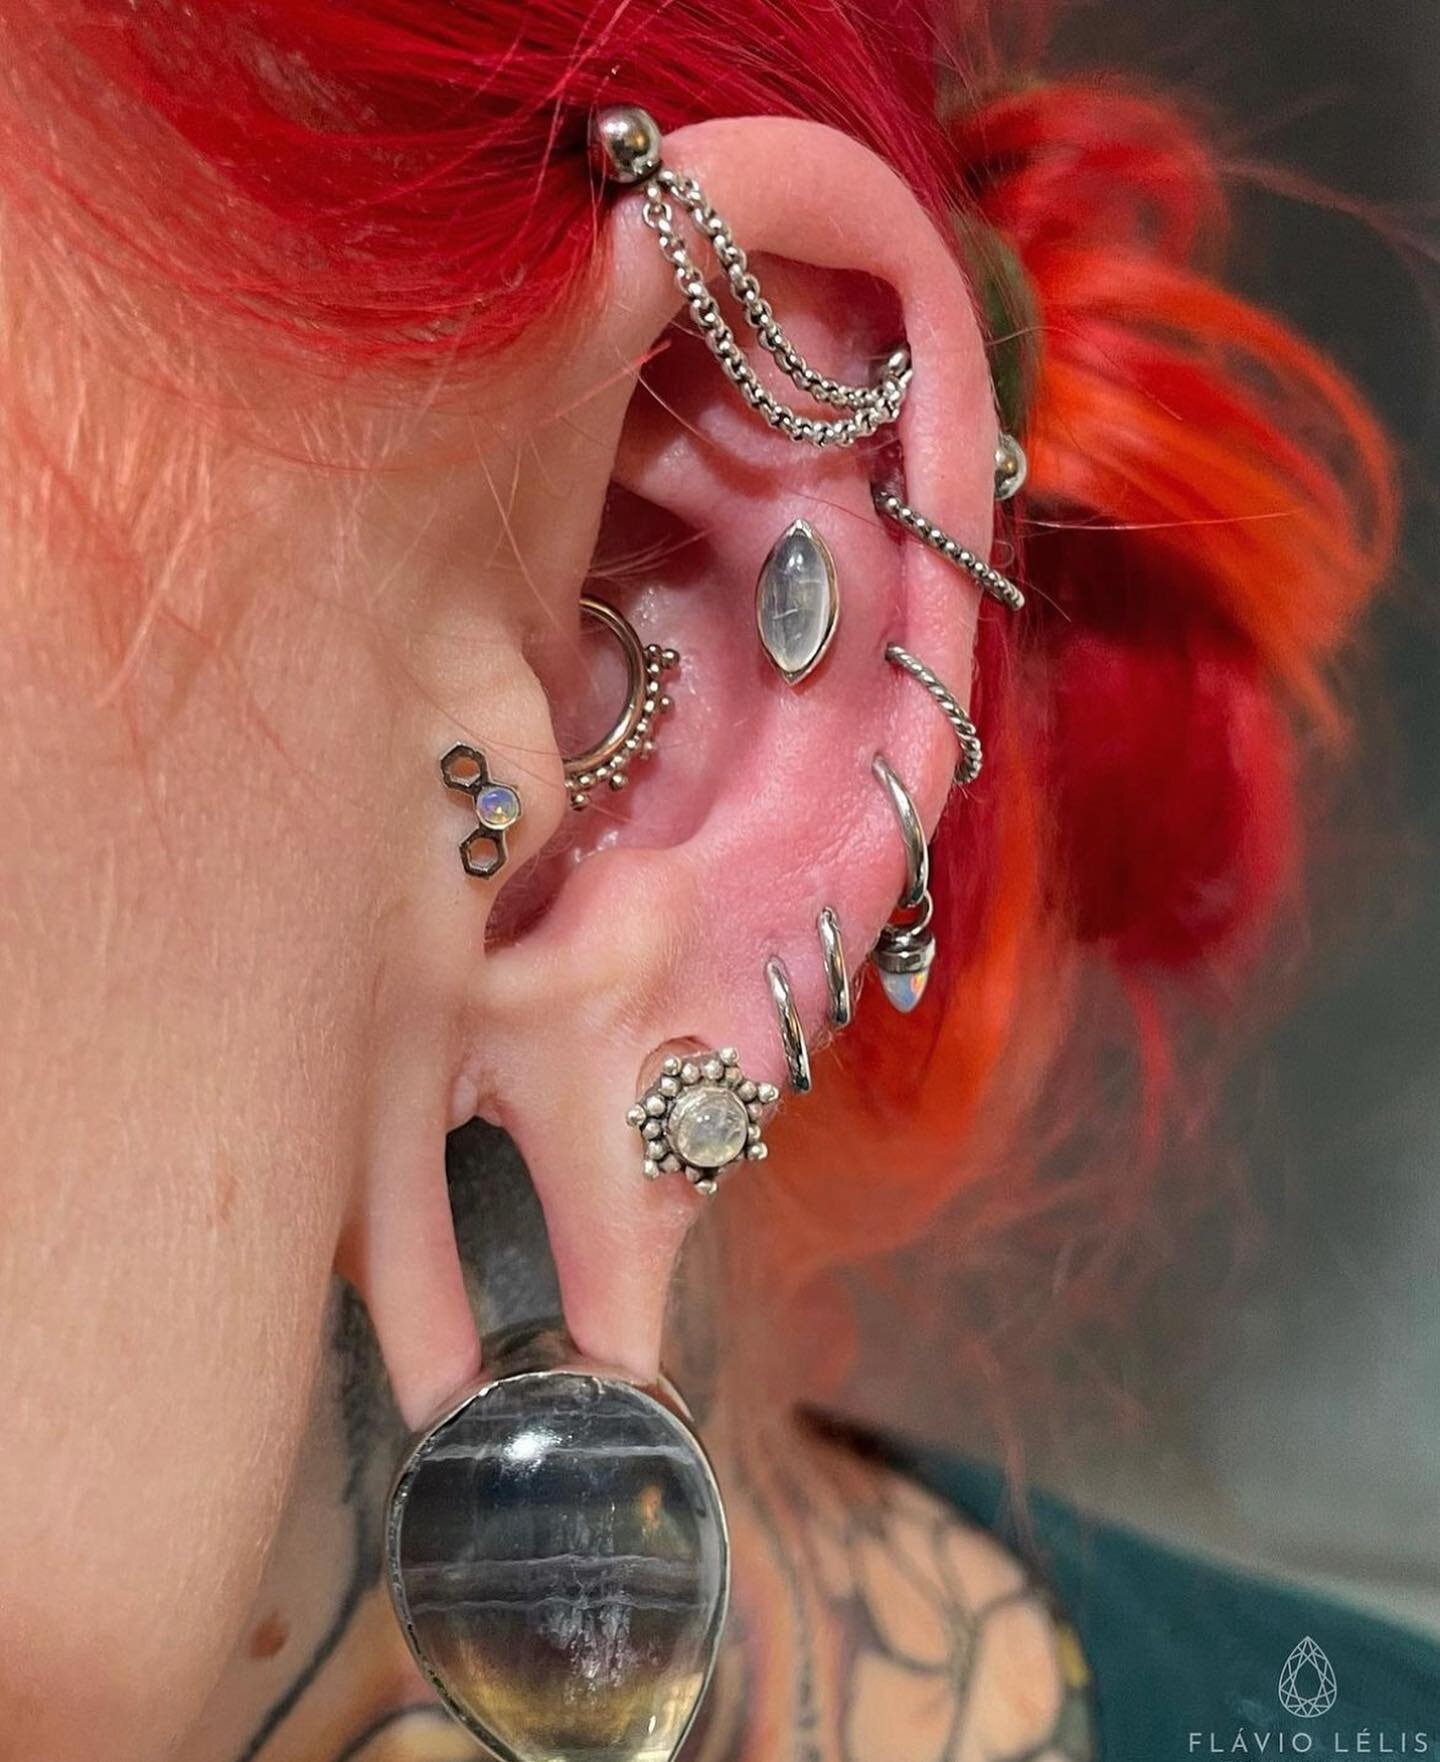 Amazing composition, with jewelry by @nagabodyjewelry in white gold and moonstone. A great inspiration @bastetpiercings ❤️ #pierced #earparty #highquality #highqualitypiercing #finejewellery #piercedearrings #piercedears